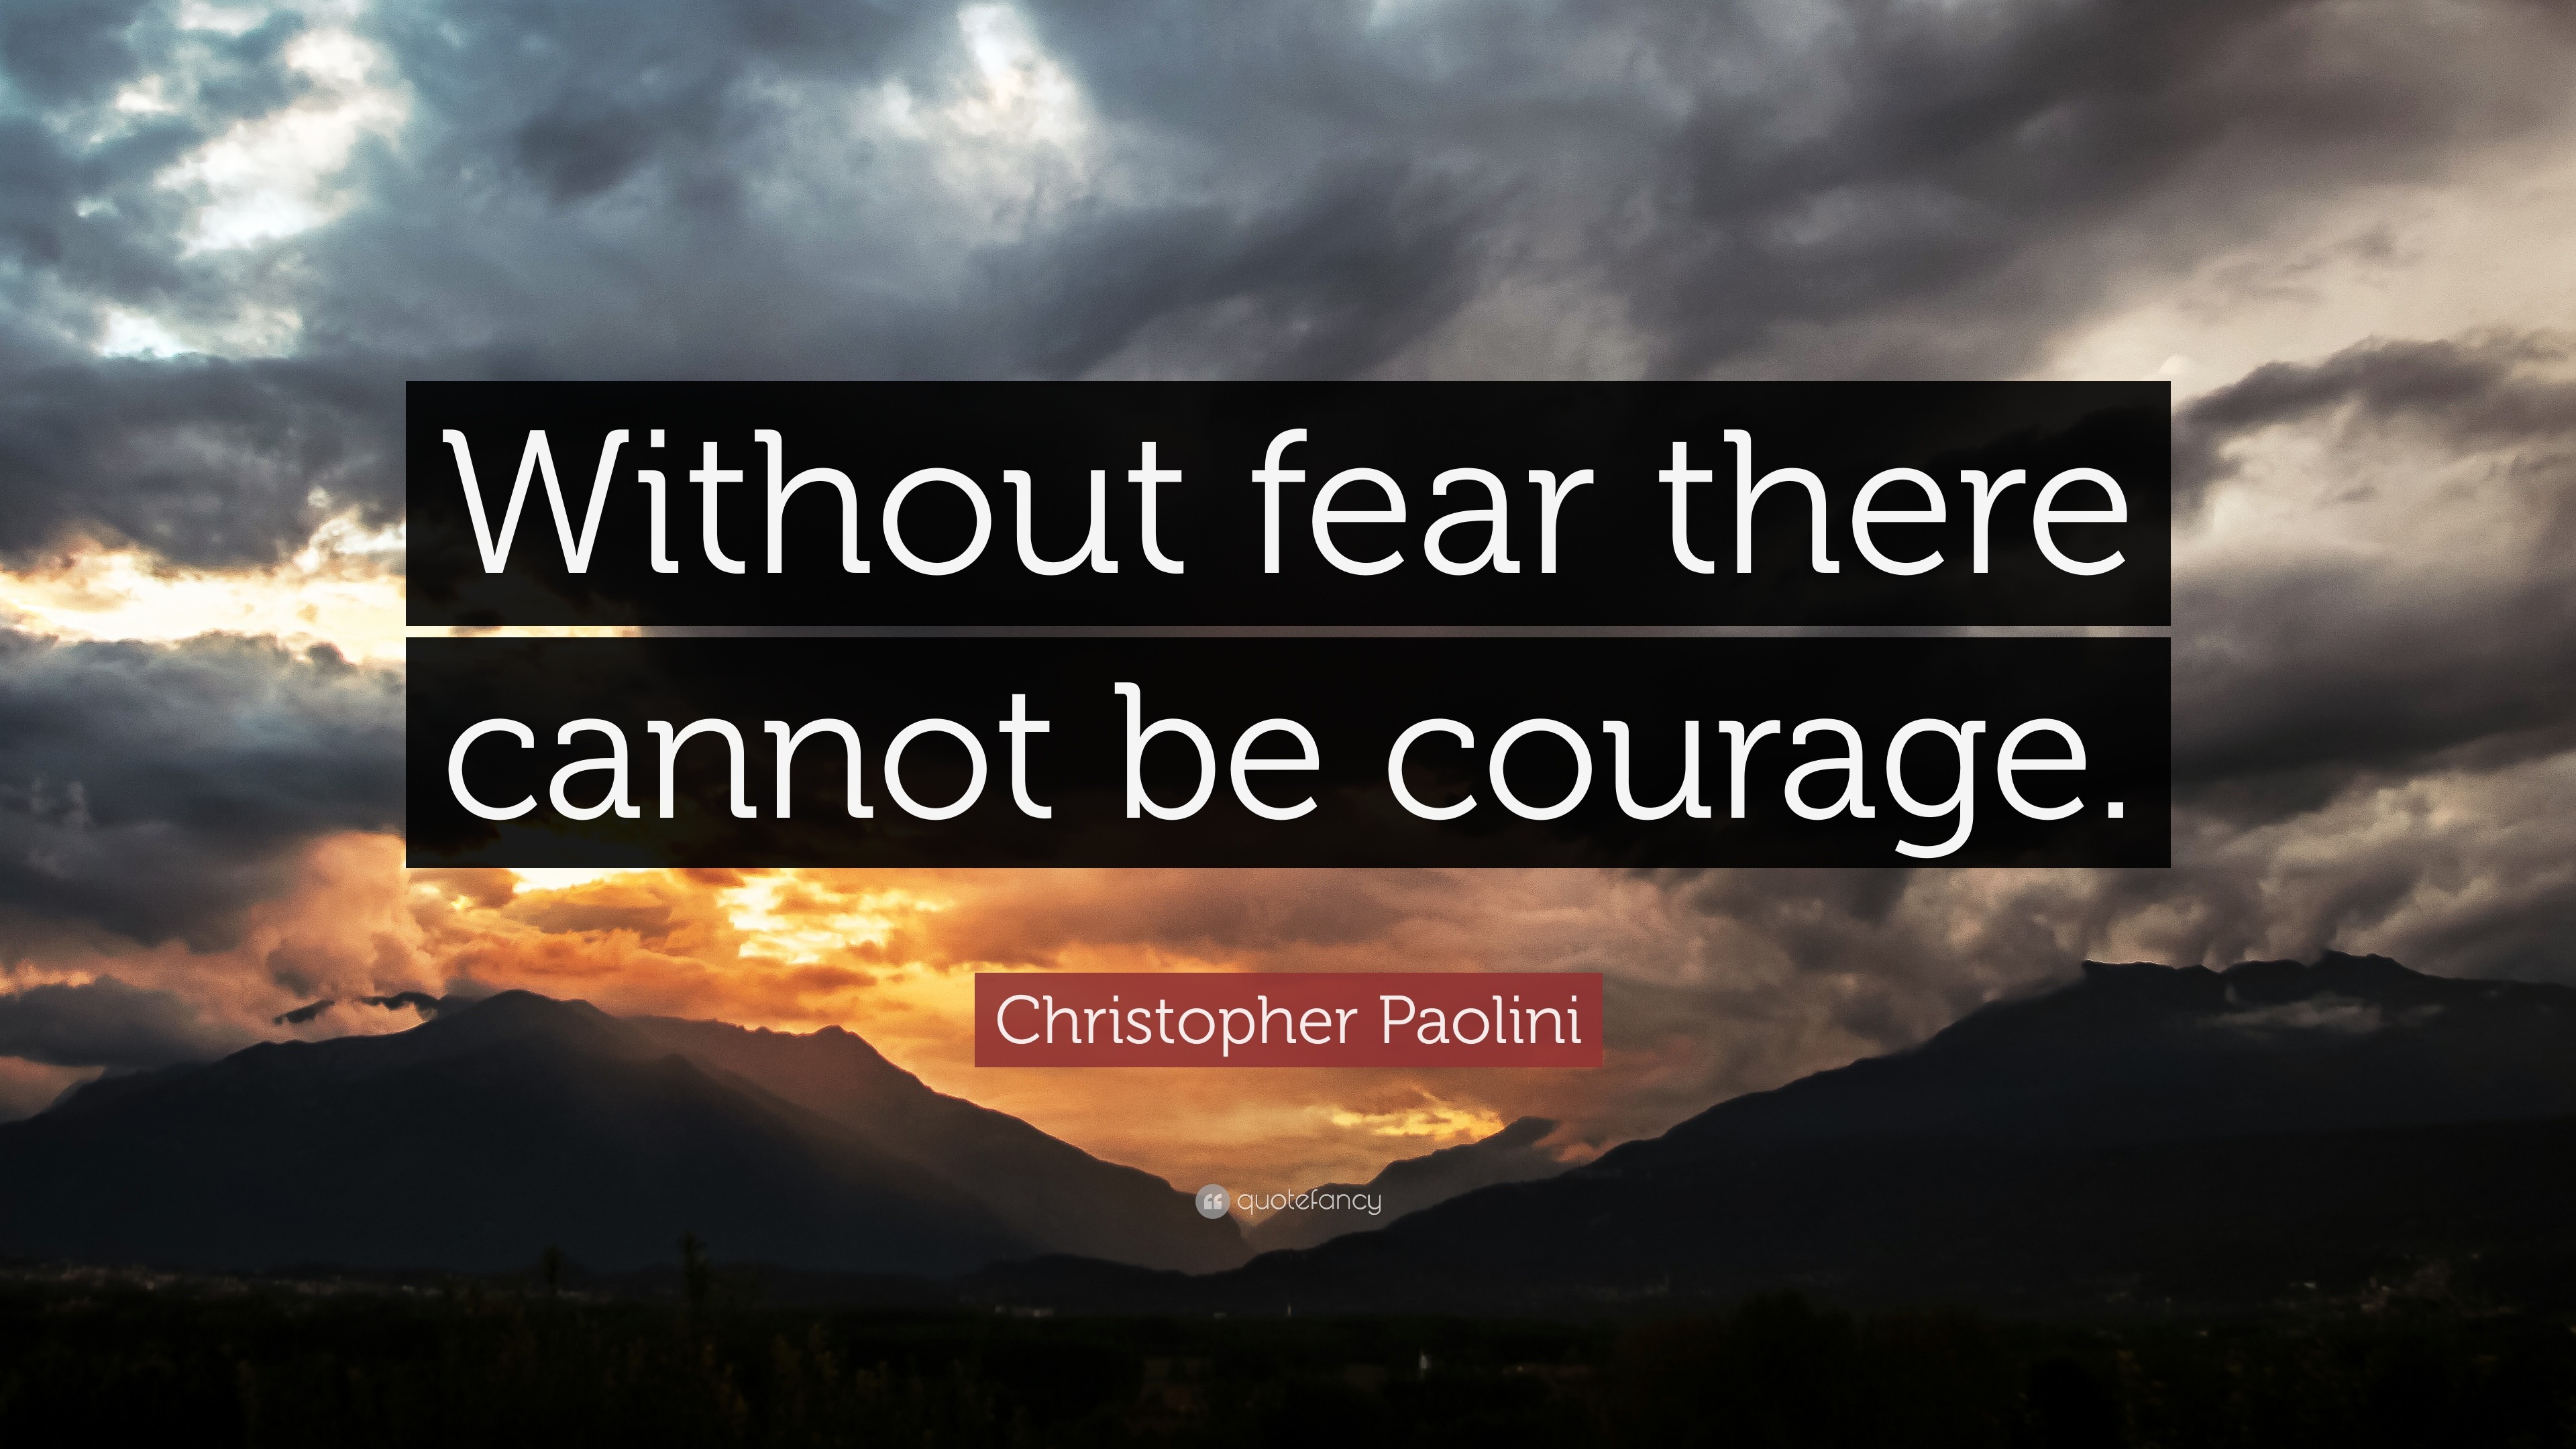 3840x2160 Courage Quotes: “Without fear there cannot be courage.” — Christopher  Paolini